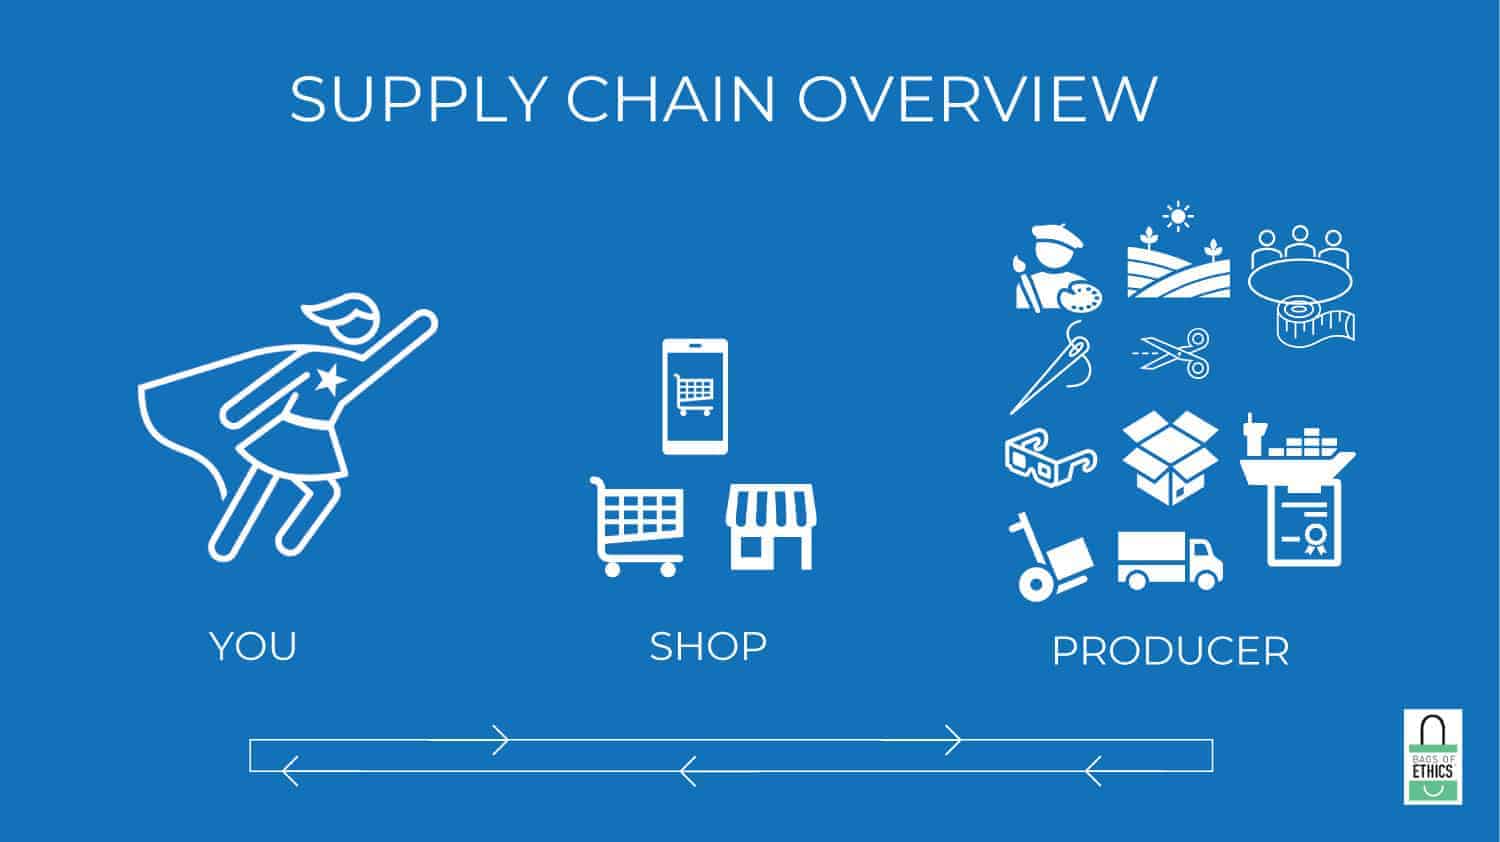 Supply chain Overview